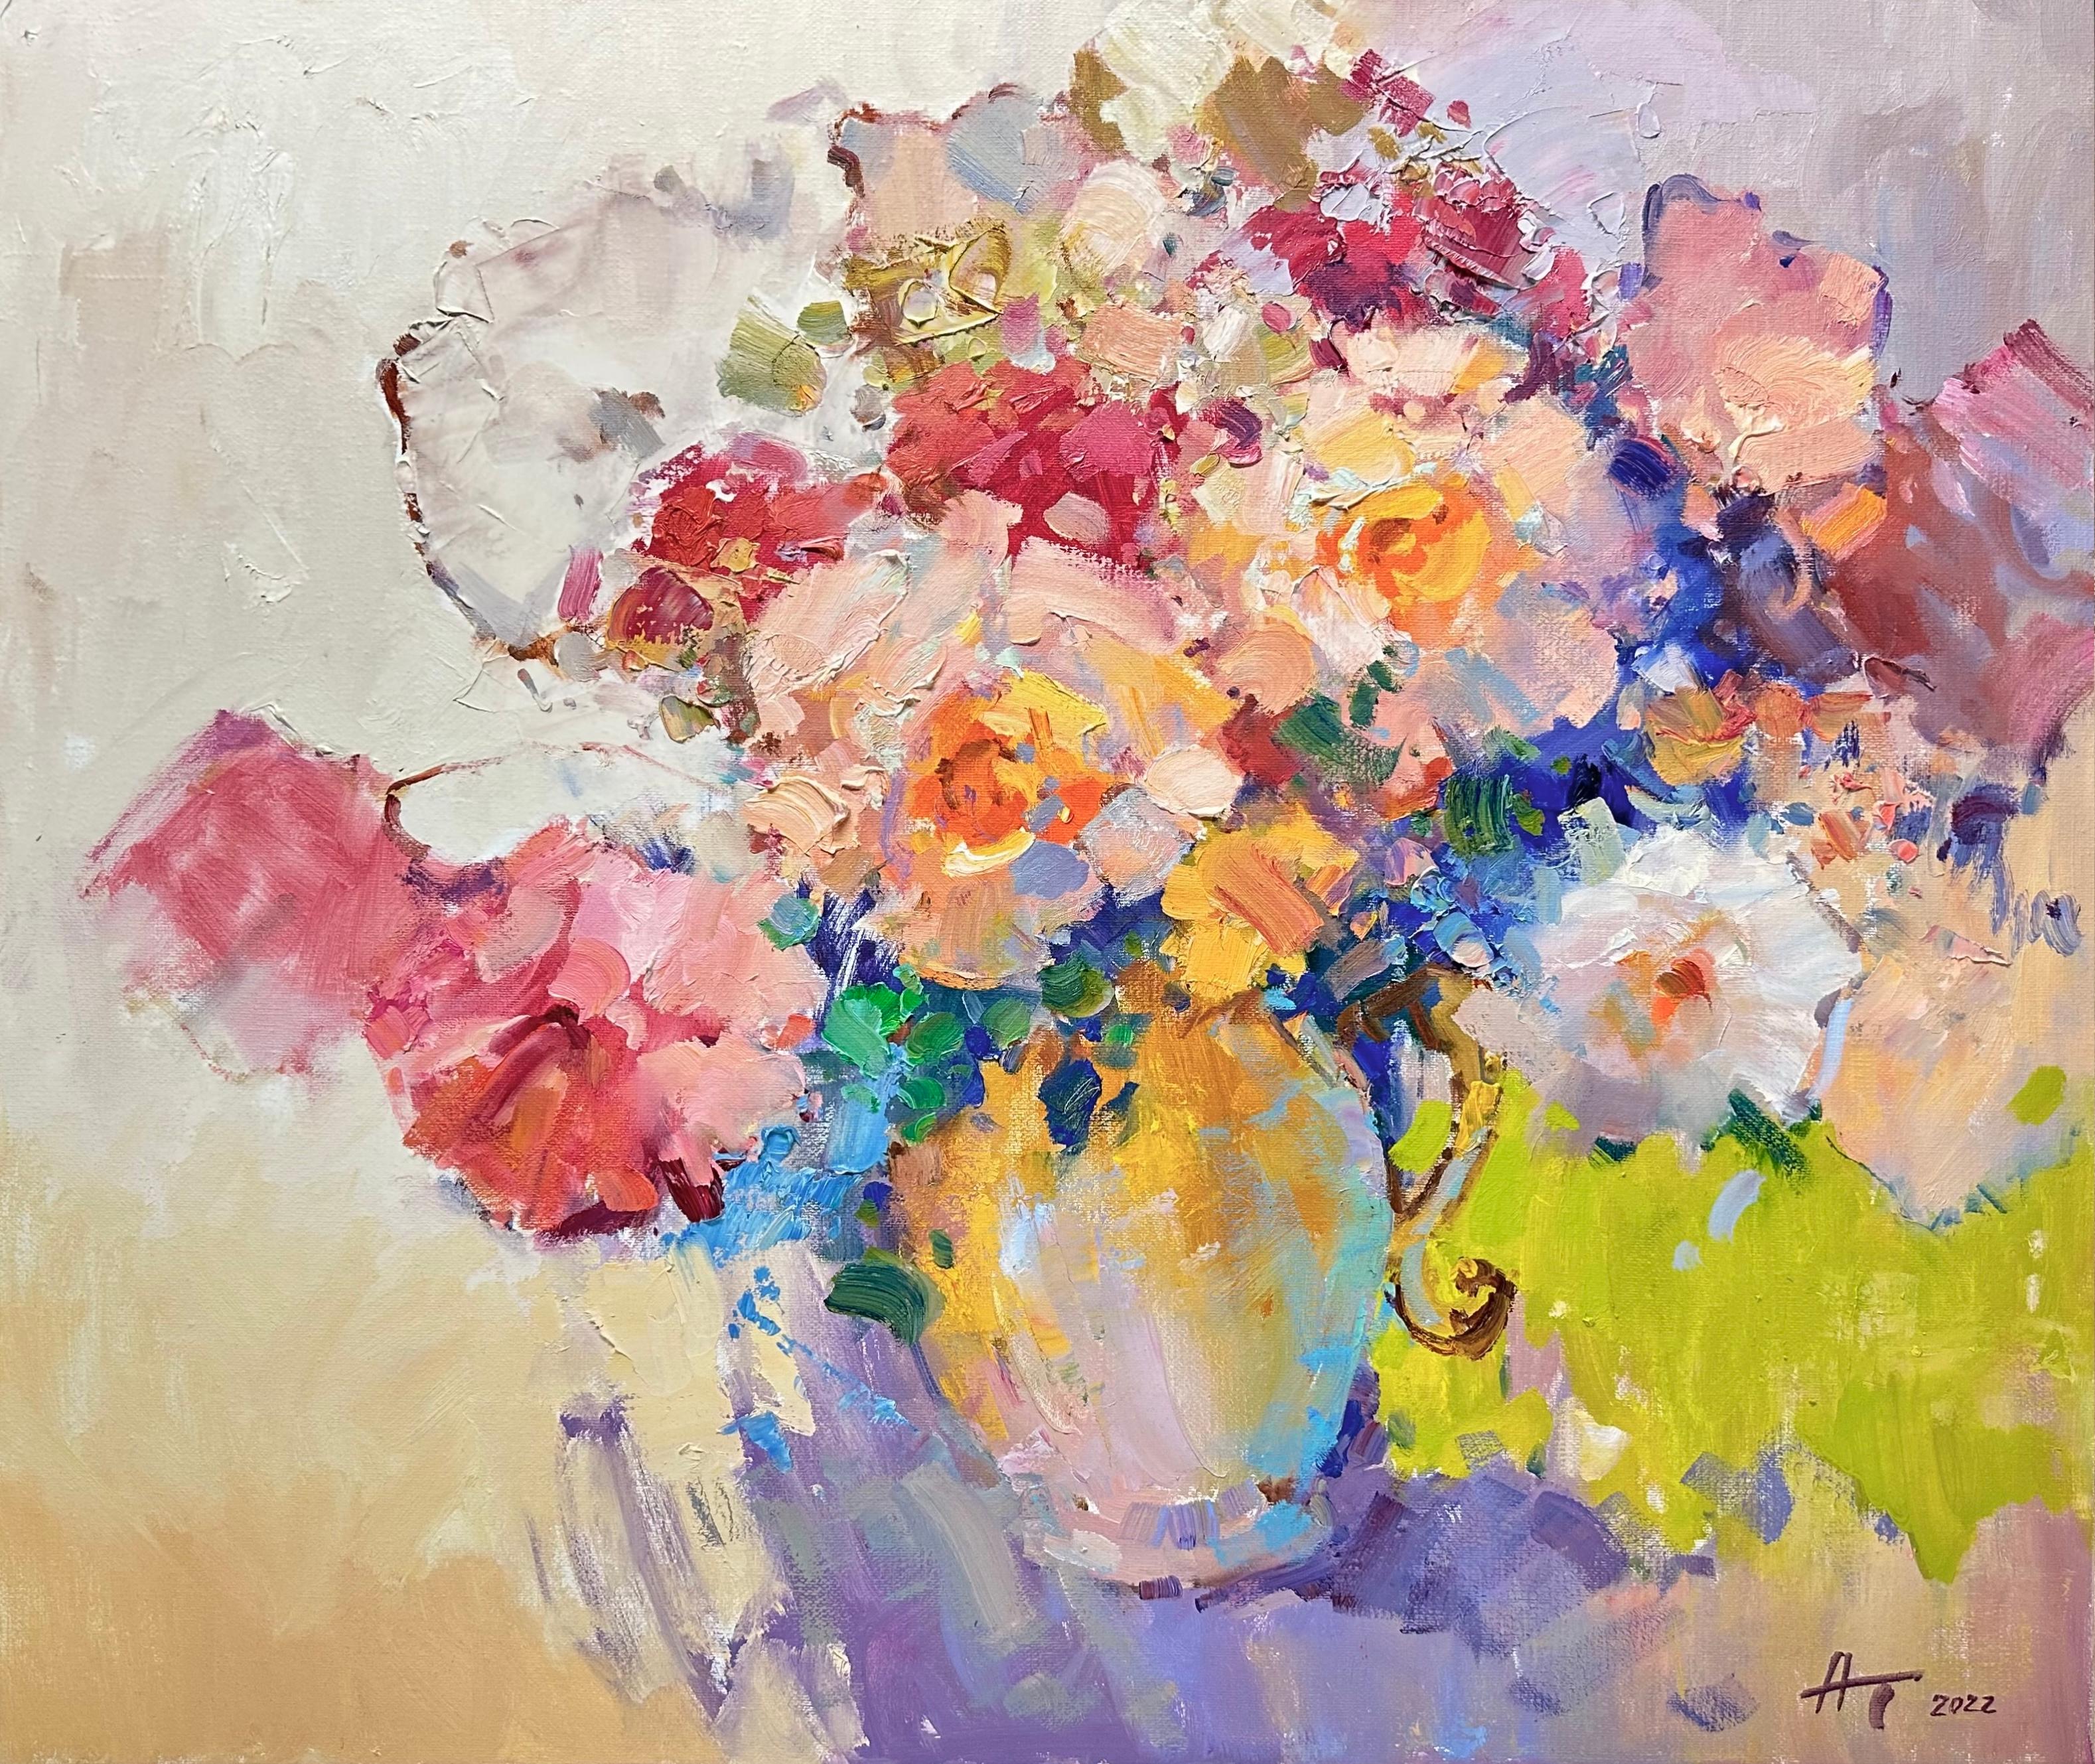 "Bouquet" is a vivid painting inspired by bright and intense colors. In this work of art, you will see a bouquet of flowers that simply radiates with vibrant colors and dynamism.

The color palette of the painting includes saturated shades such as